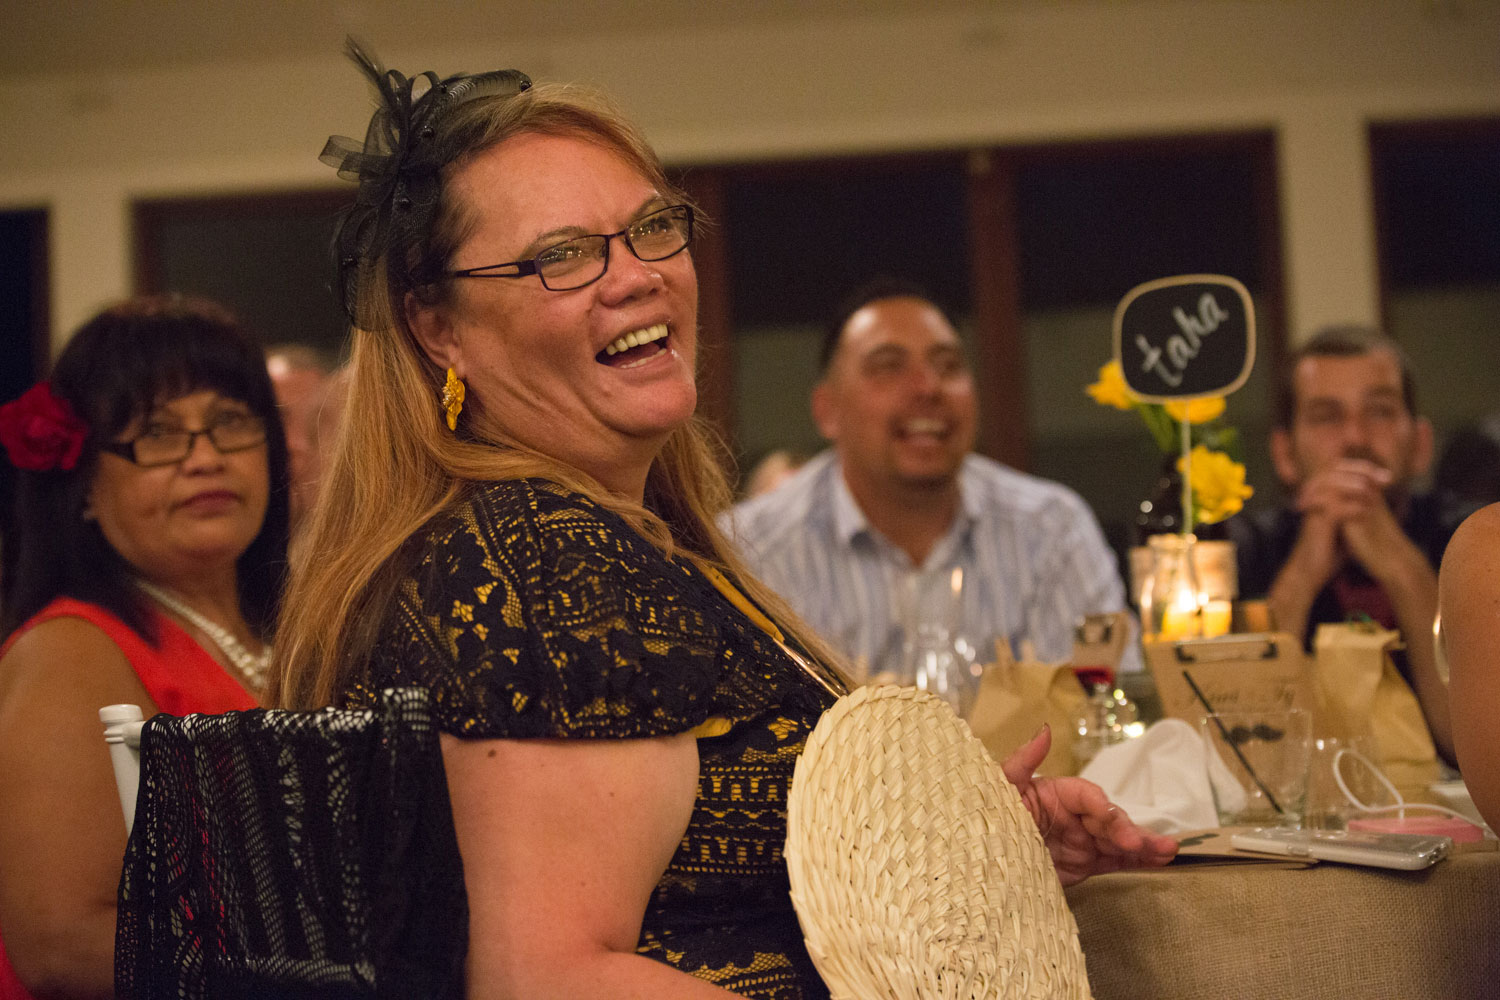 gracehill auckland wedding guest laughing